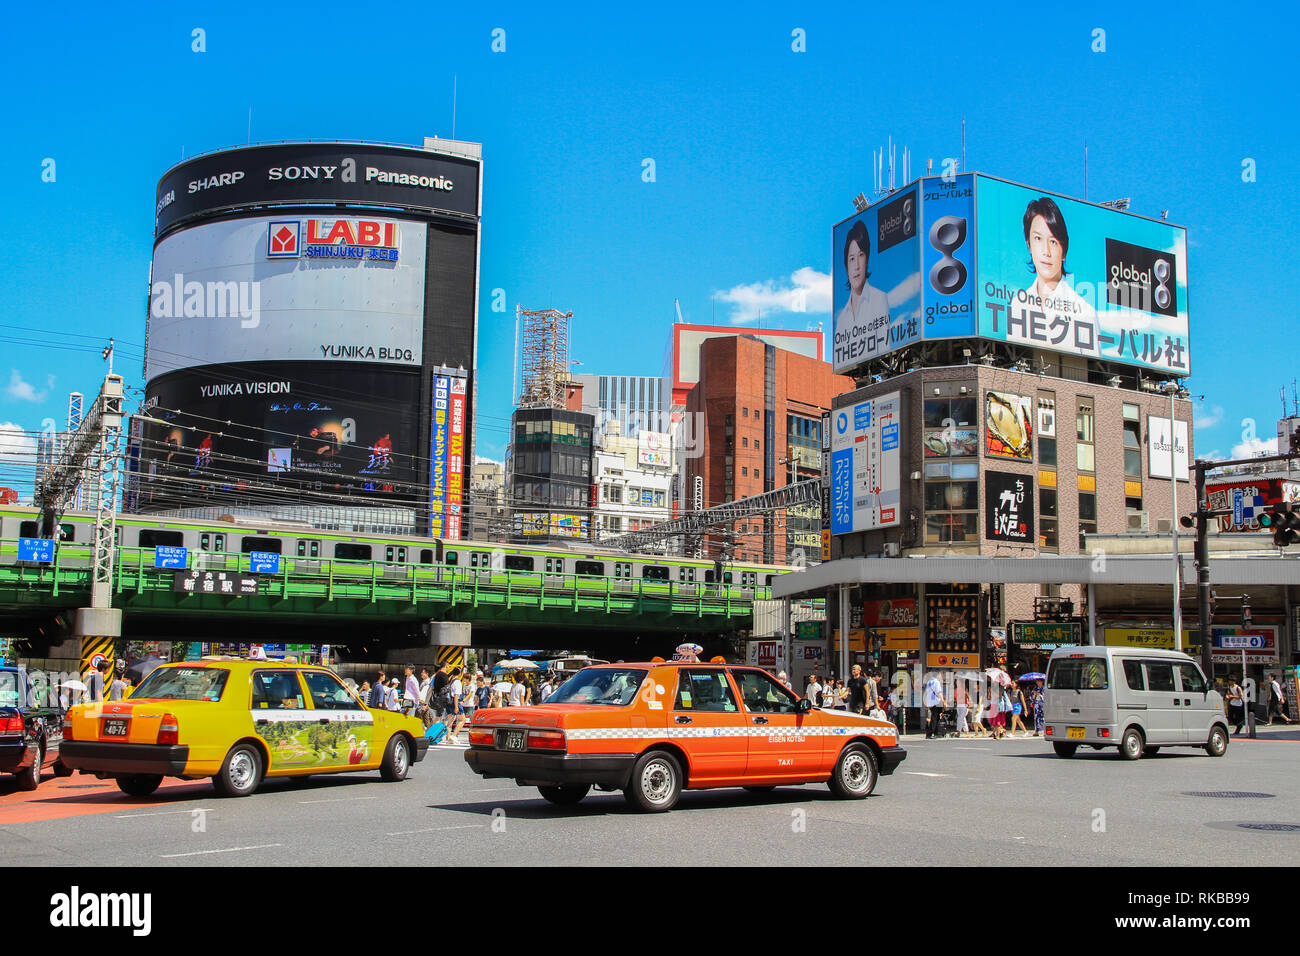 Intersection showing the immense traffic of the megacity Tokyo, Japan, with cars, pedestrians, subway and huge billboard advertisements Stock Photo